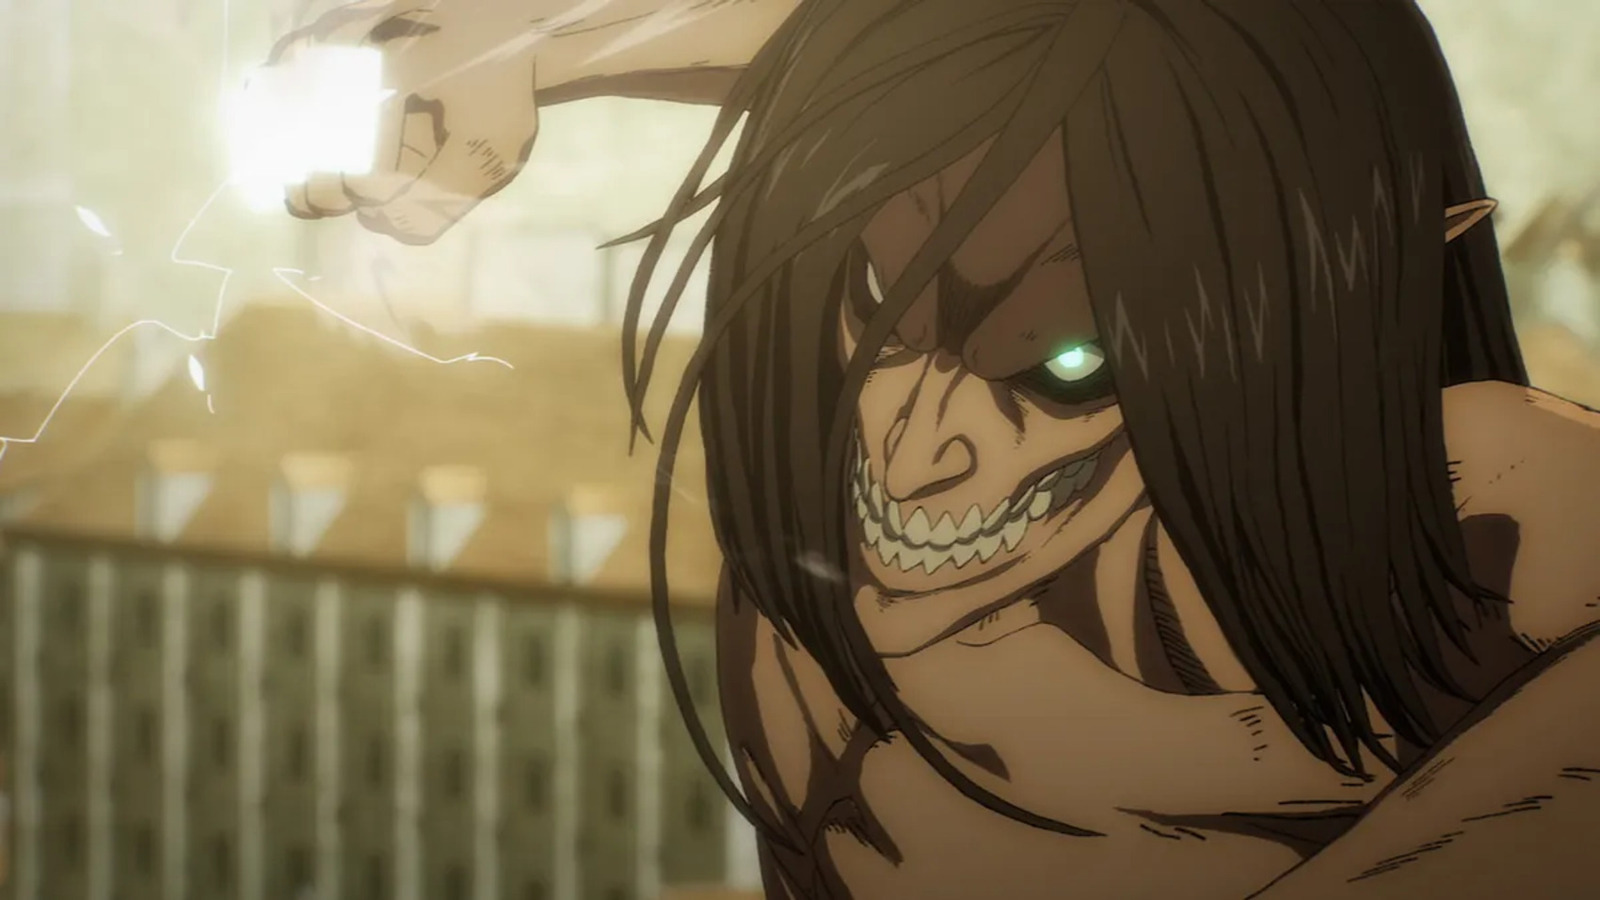 Attack on Titan' manga series concludes run of almost 12 years